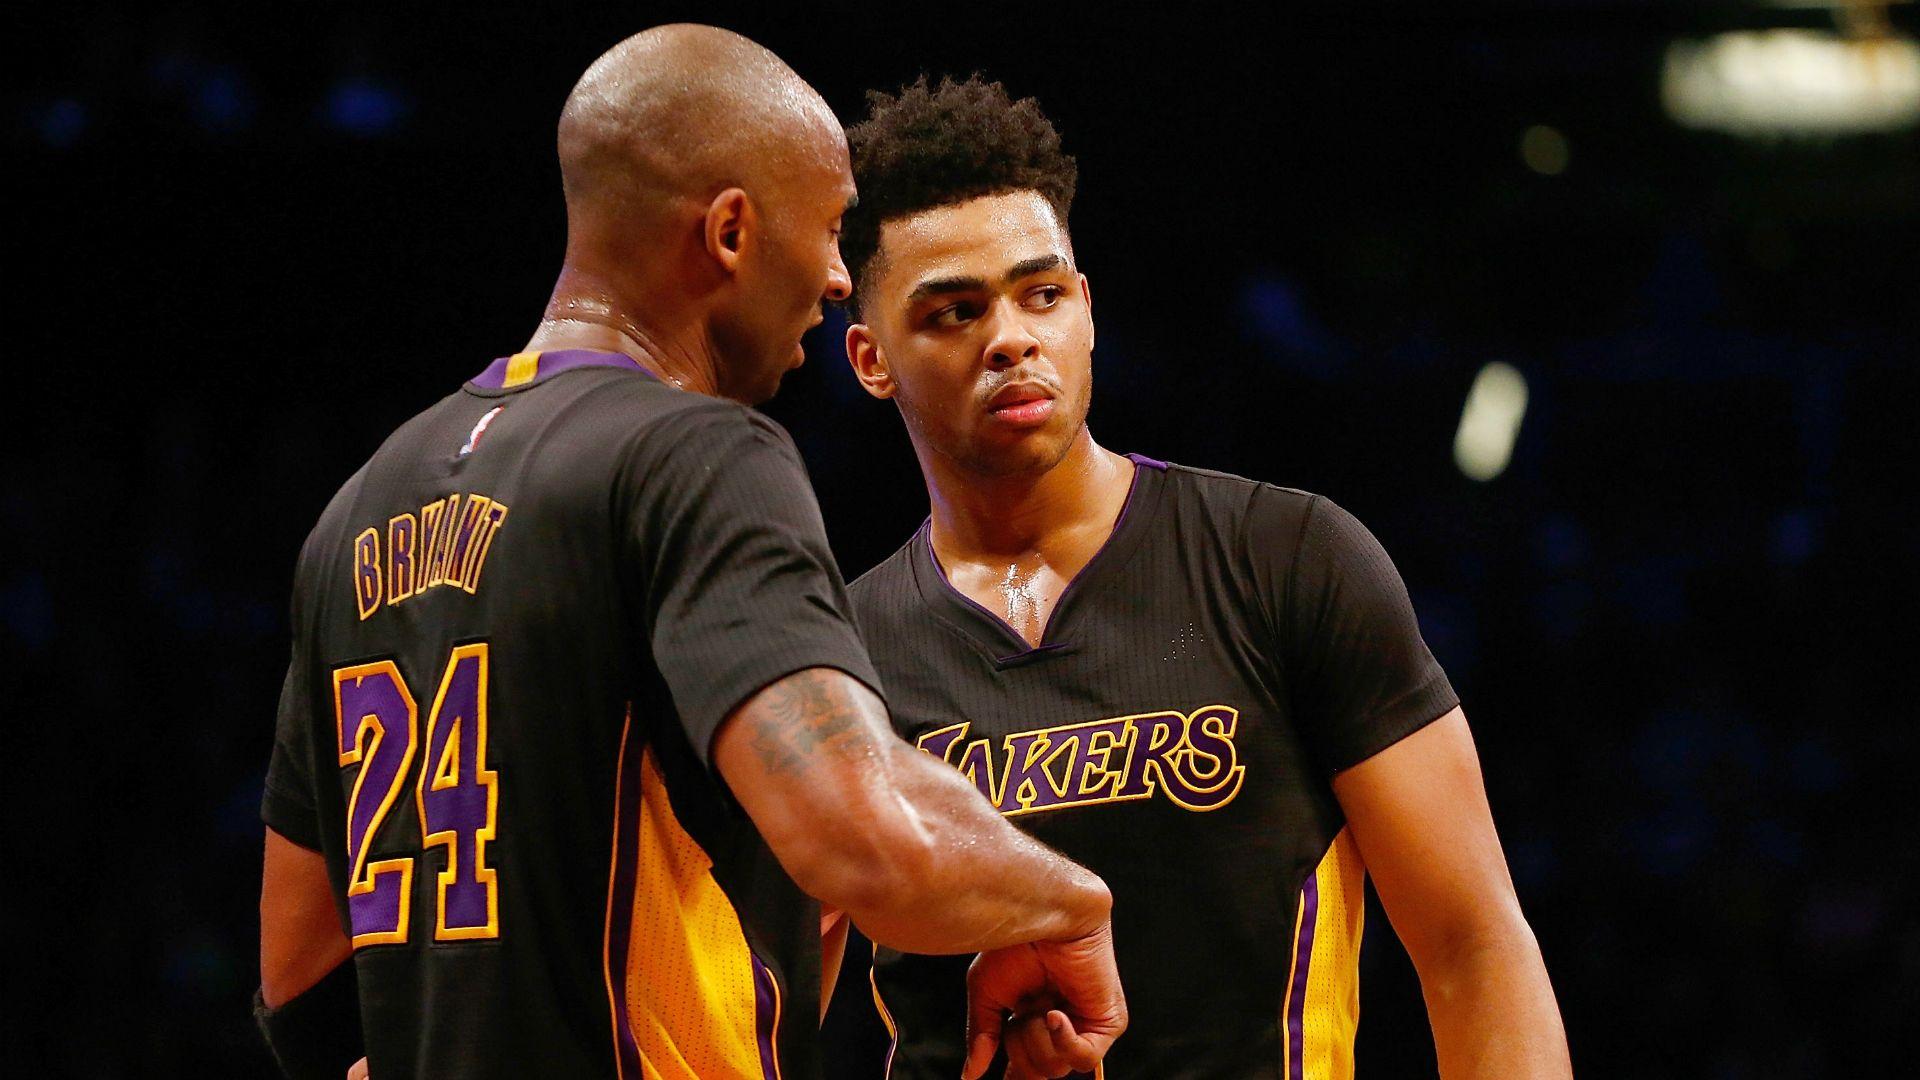 D'Angelo Russell: So What Do You Think of Him Now?